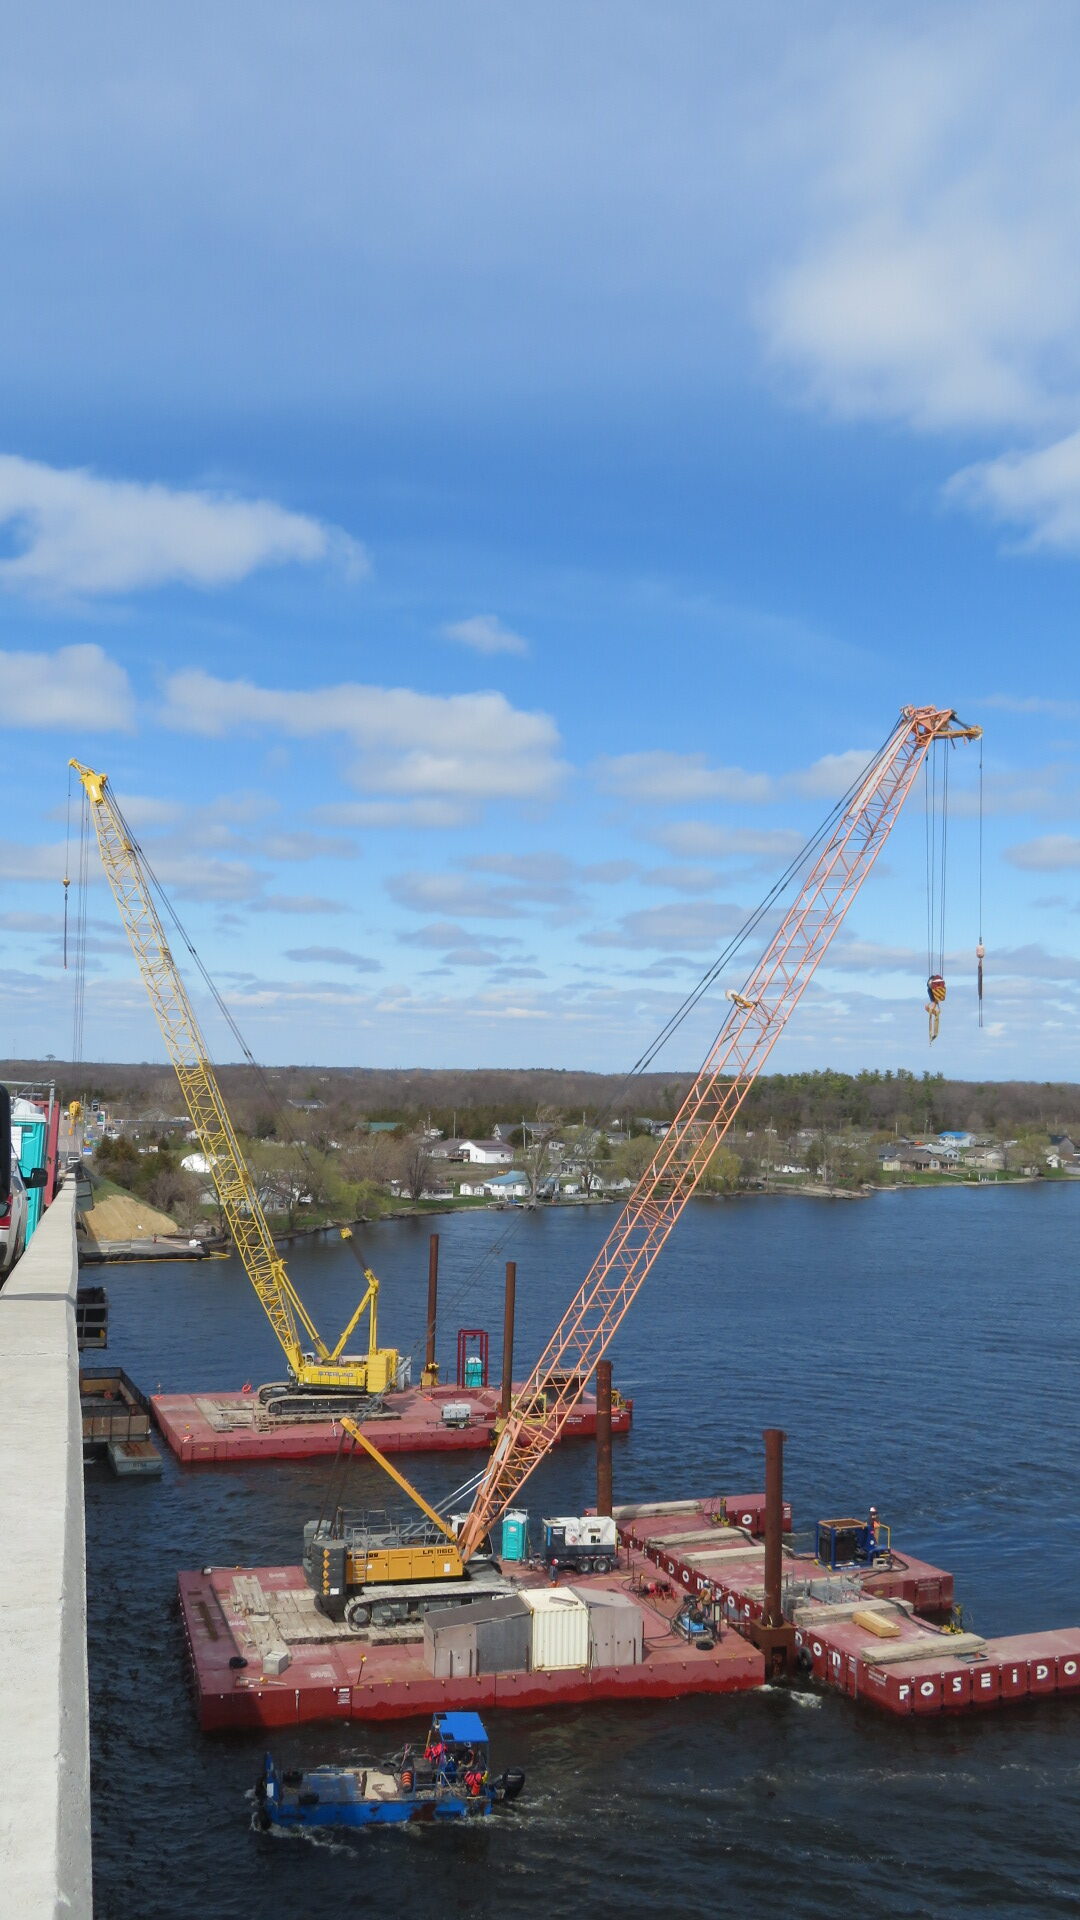 View from above of both 200-ton cranes on the barges